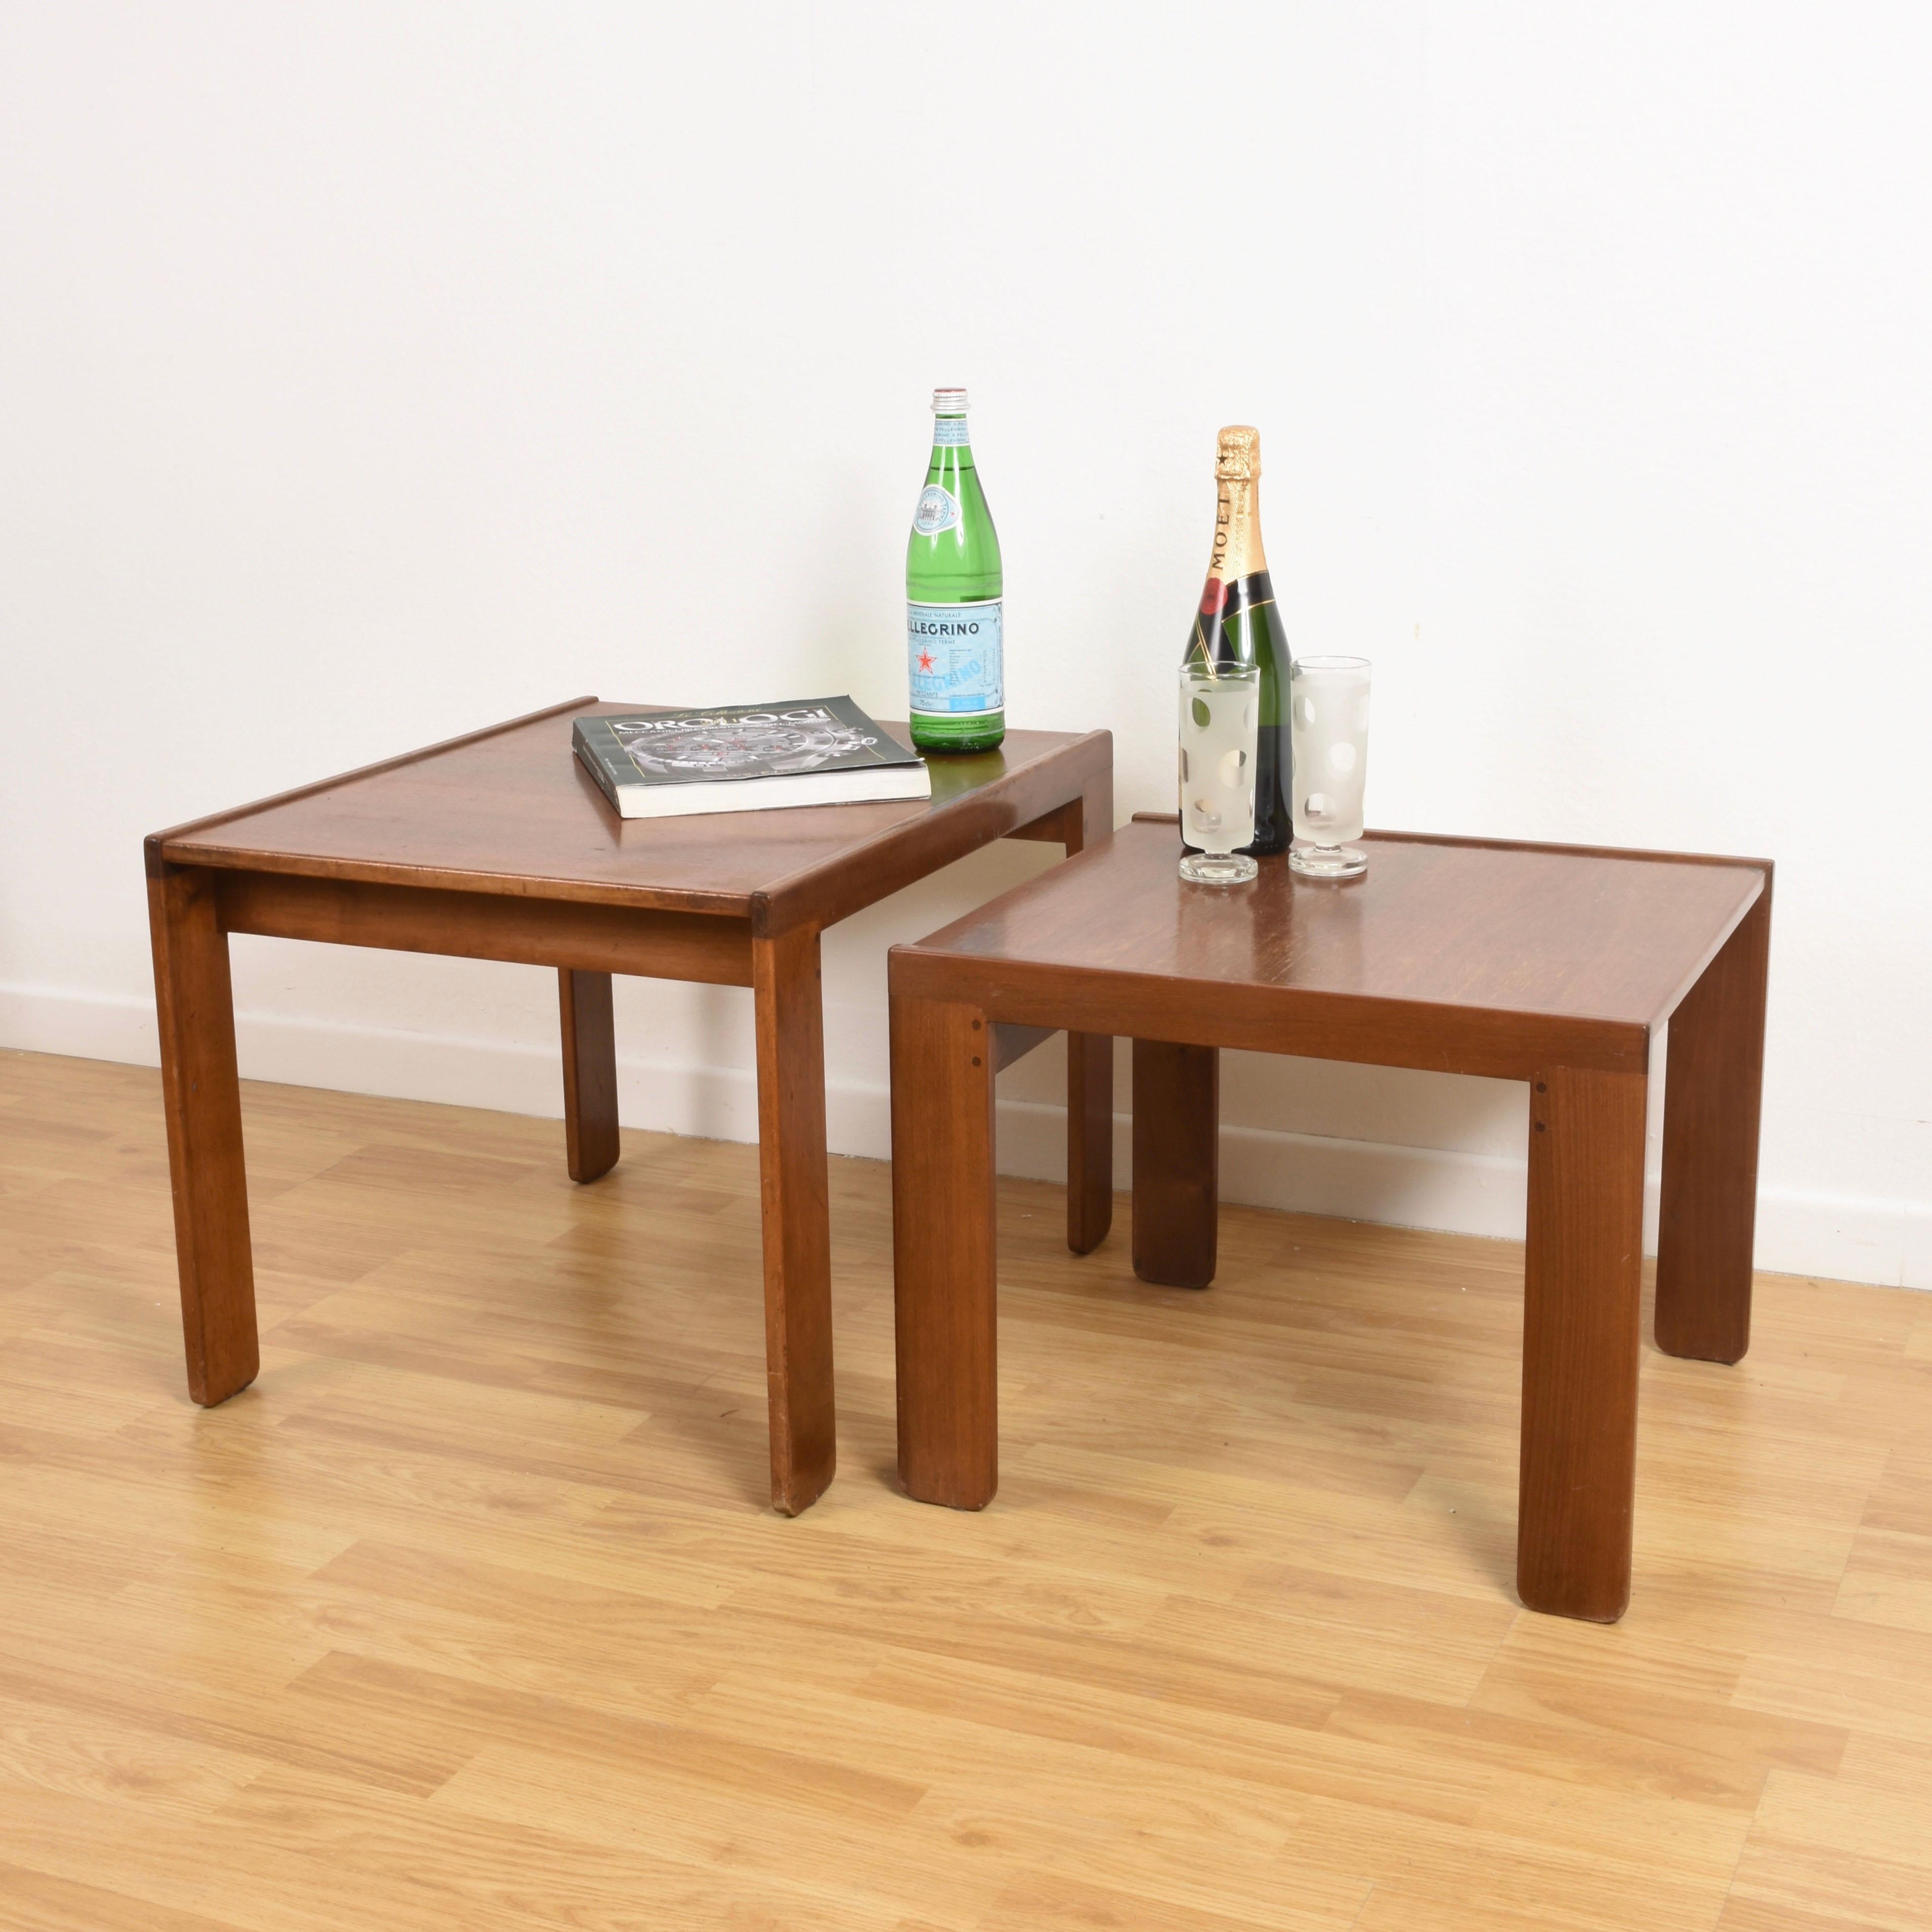 This set, consisting of two nesting tables, was designed in the 1960s by Afra and Tobia Scarpa
Measures: Large table 19.88 D, 24 L, 17.38 H
Medium table 18.25 D, 19.5 L, 15.5 H.